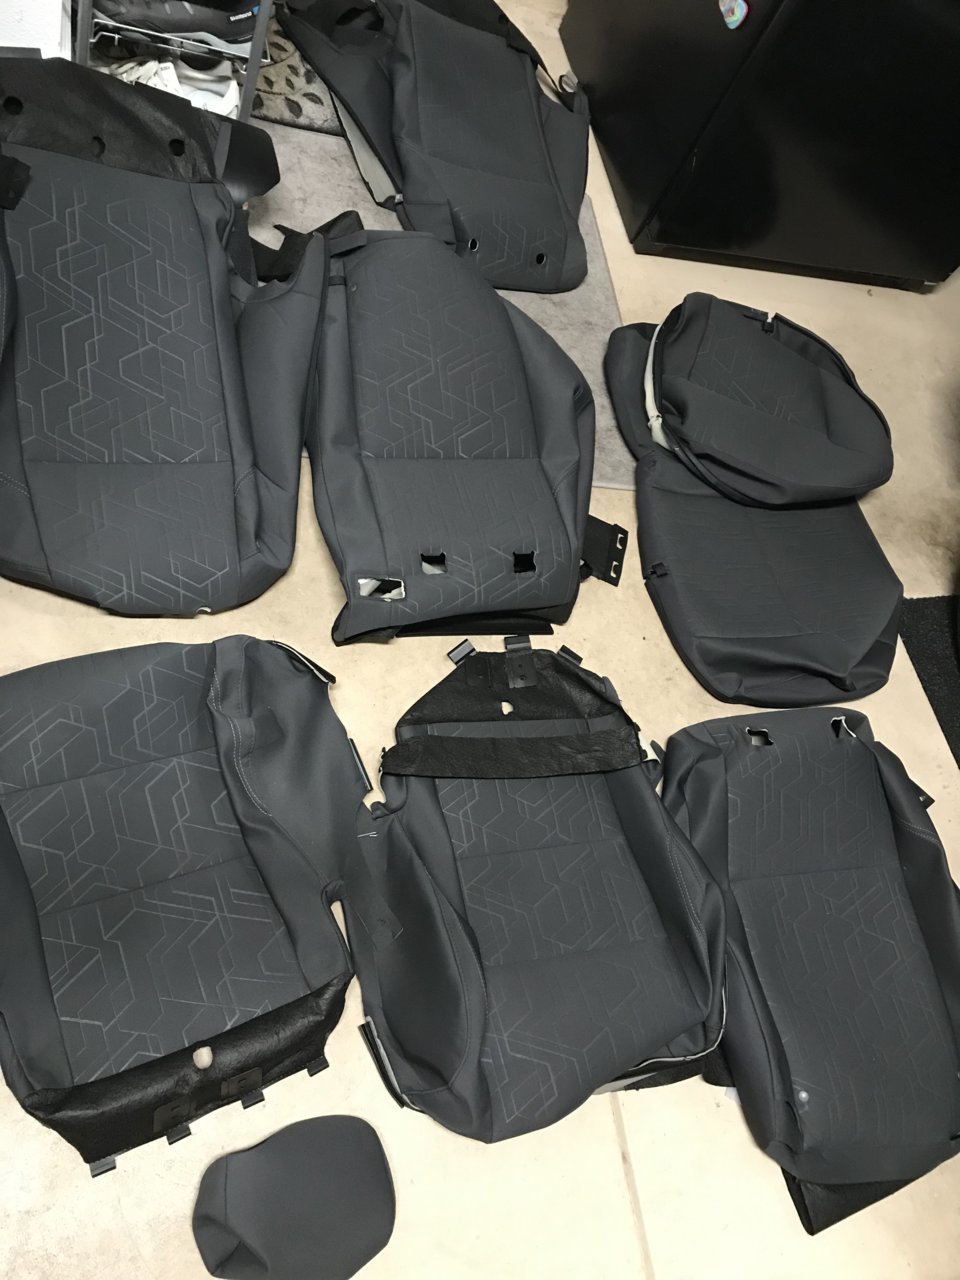 SOLD - TRD Off Road OEM Seat Covers | Tacoma World 2018 Toyota Tacoma Trd Off Road Seat Covers